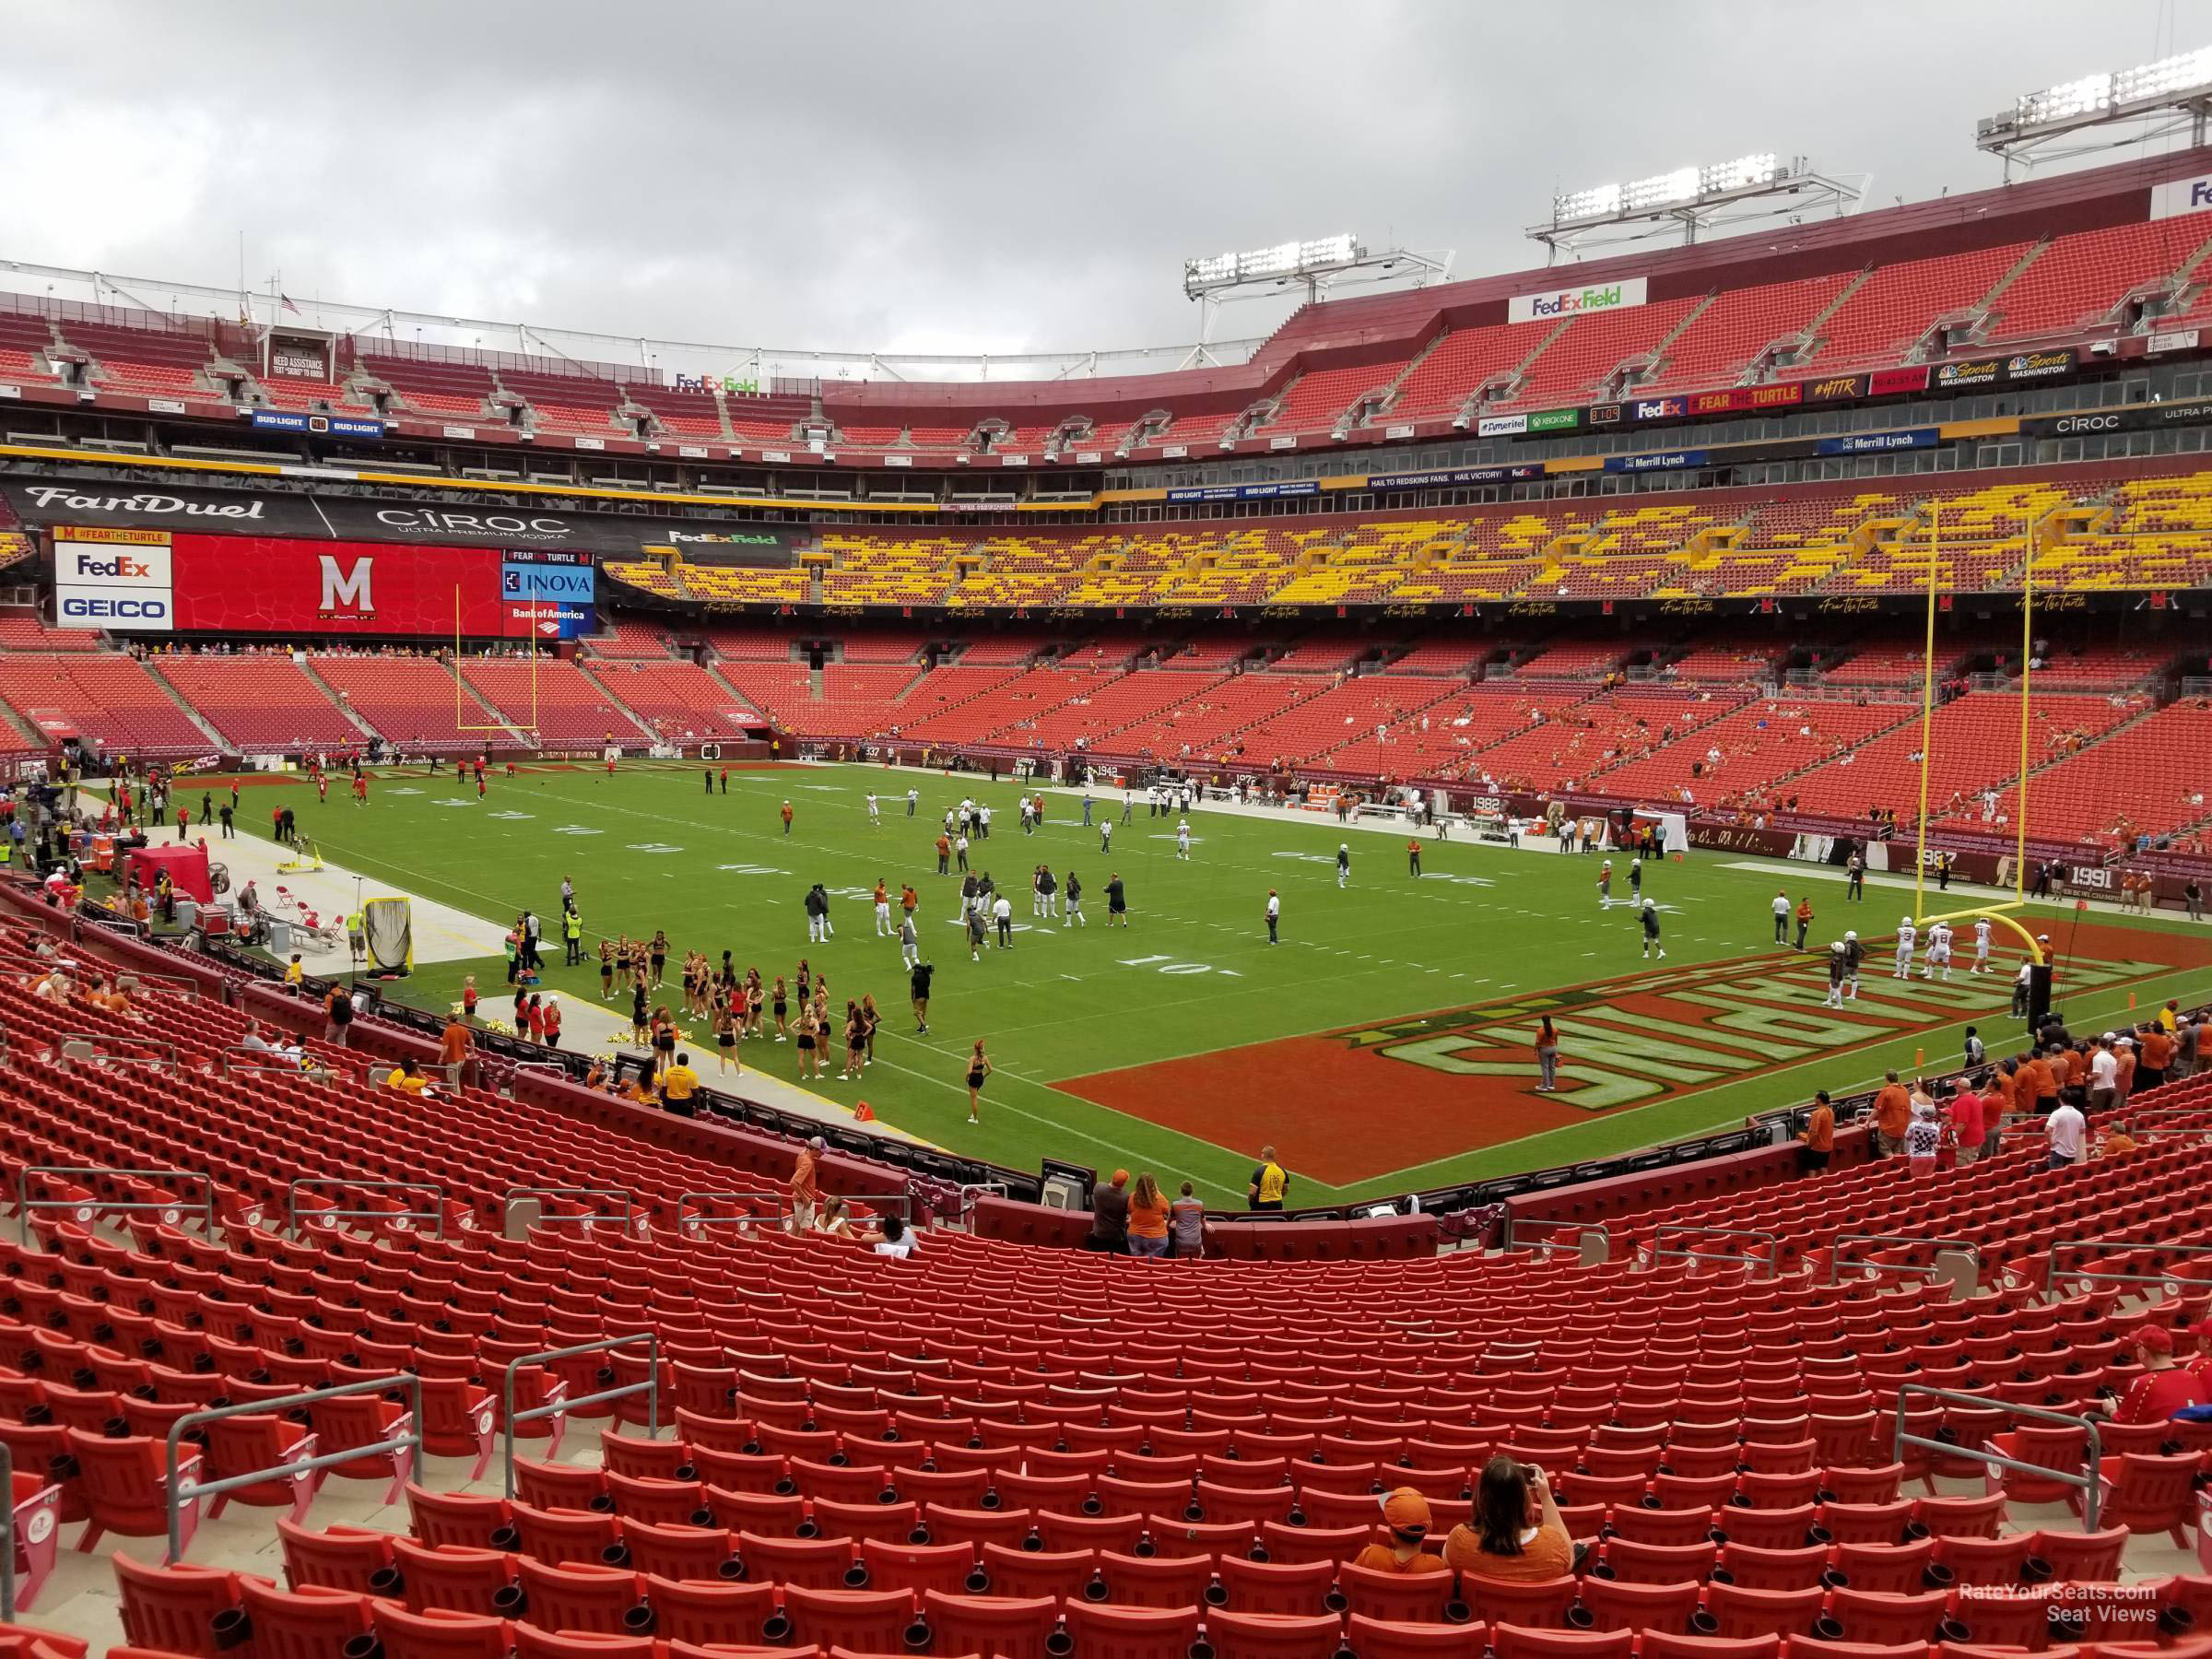 section 236, row 1 seat view  - fedexfield